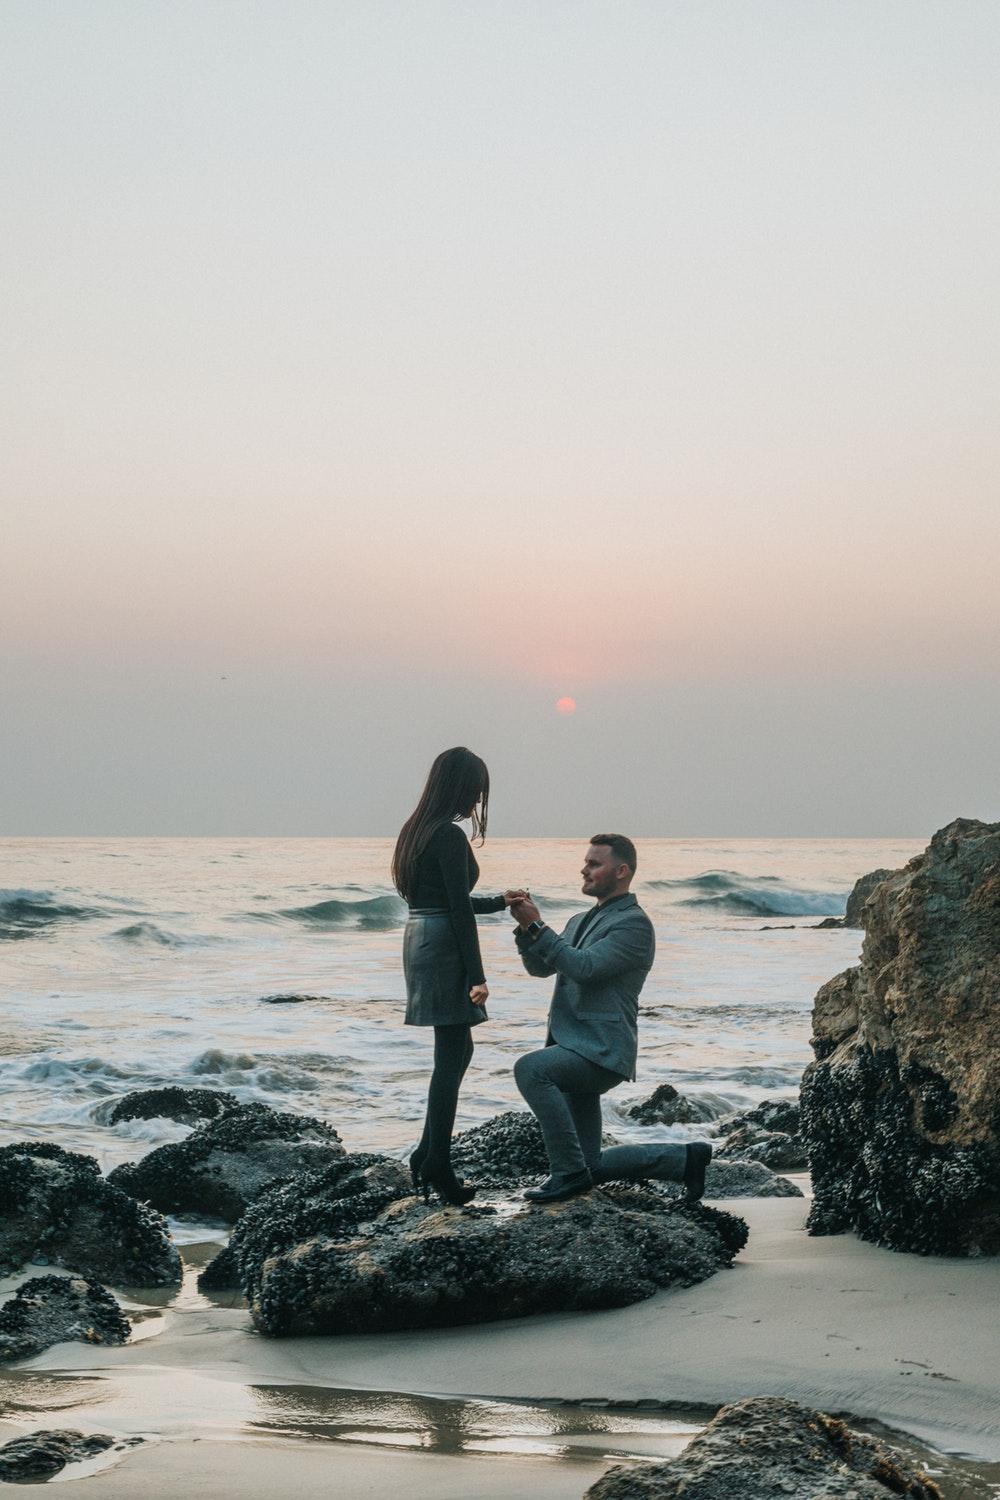 Proposal Picture. Download Free Image